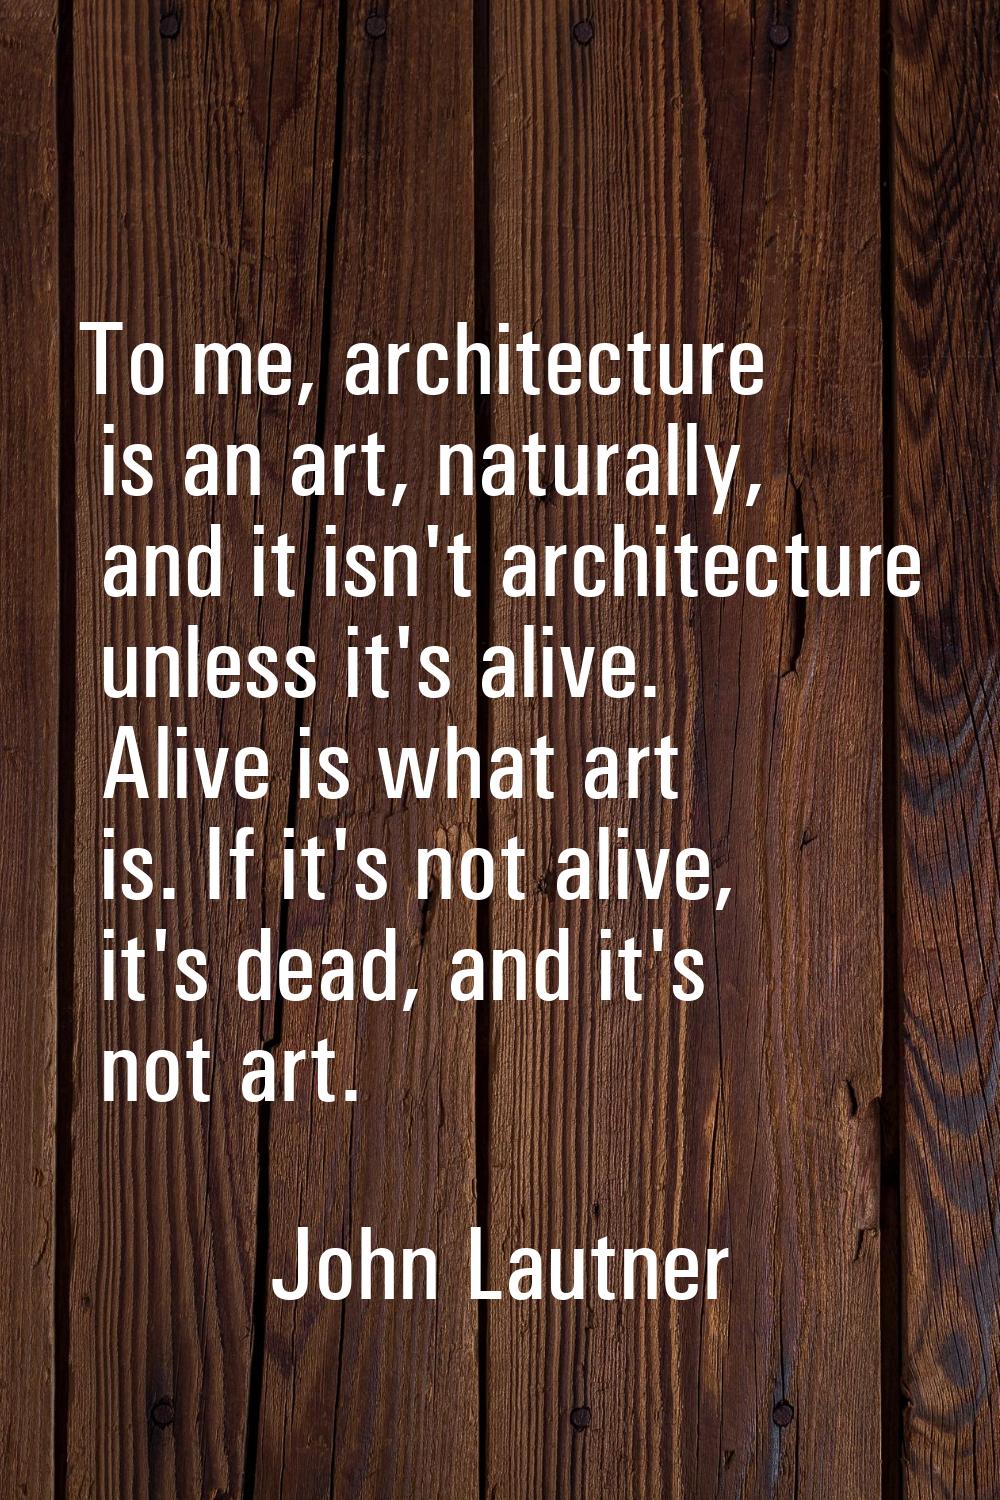 To me, architecture is an art, naturally, and it isn't architecture unless it's alive. Alive is wha